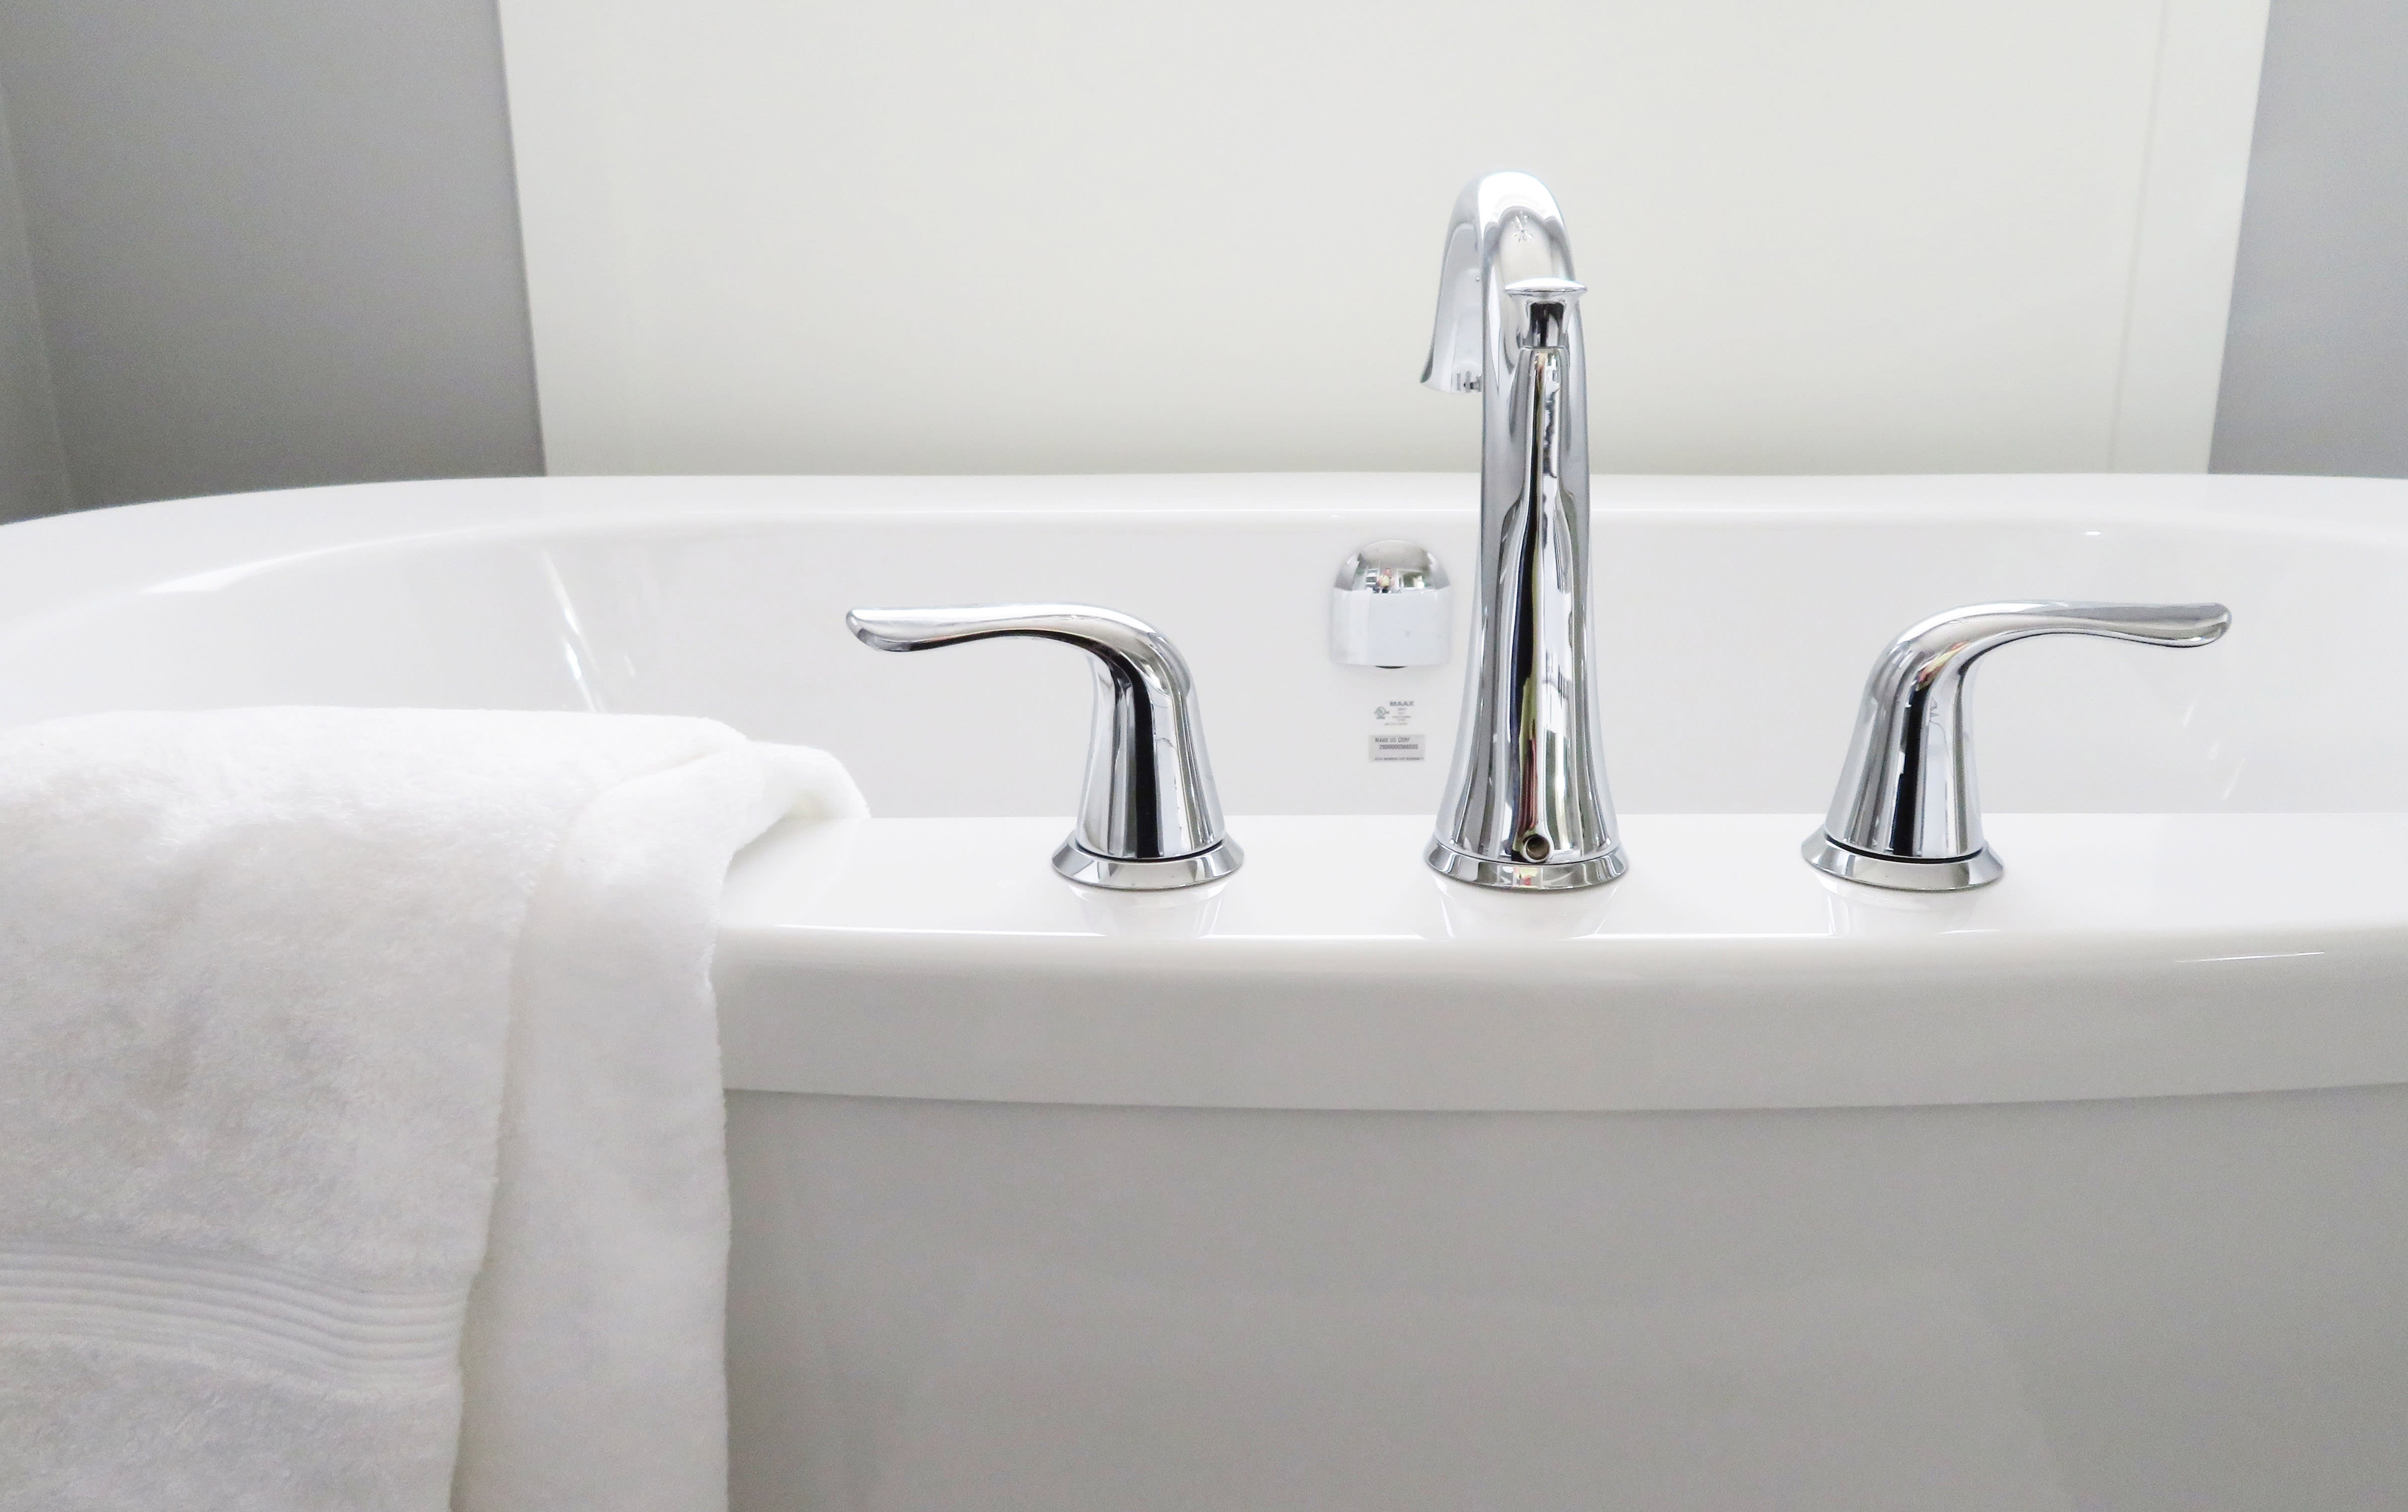 5 Ways To Clean An Old Porcelain Tub, How To Clean An Old Stained Enamel Bathtub